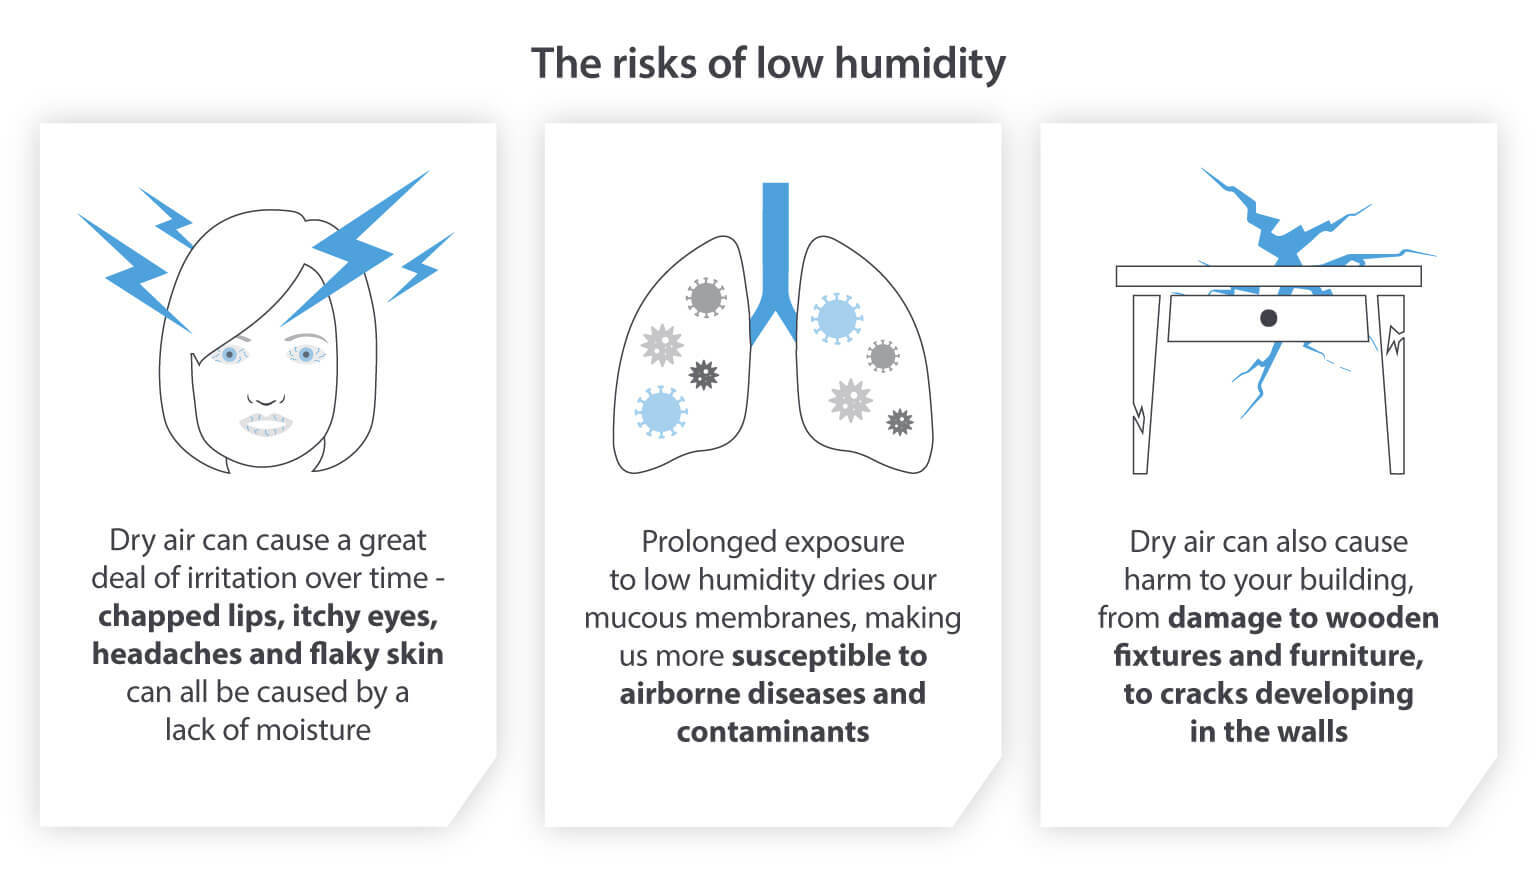 The risks of low humidity